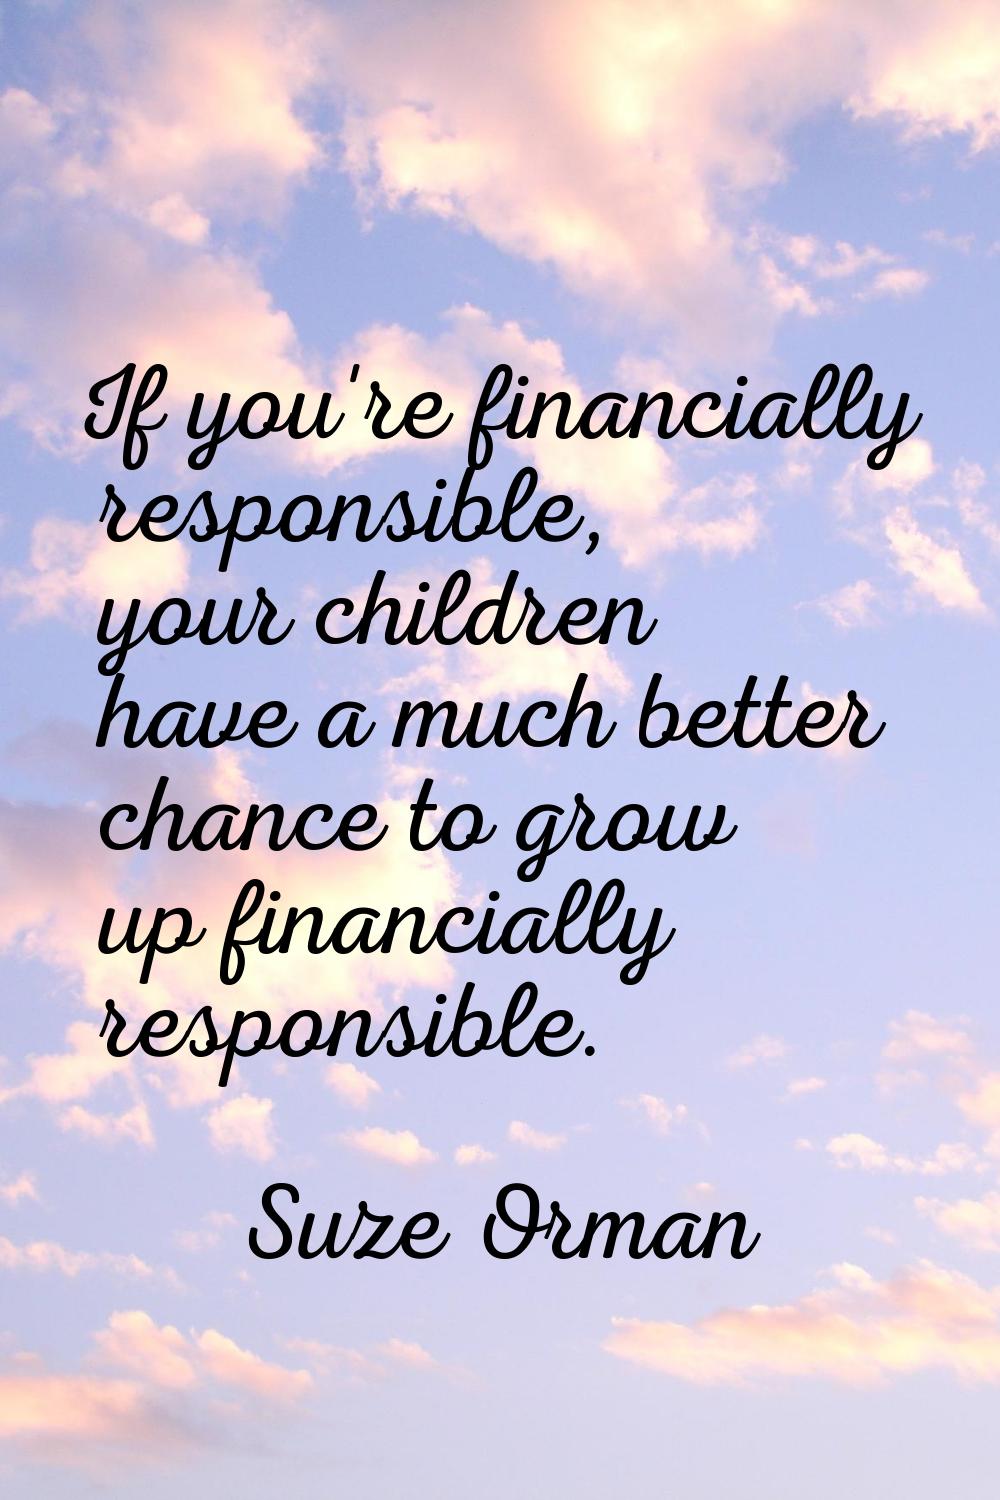 If you're financially responsible, your children have a much better chance to grow up financially r